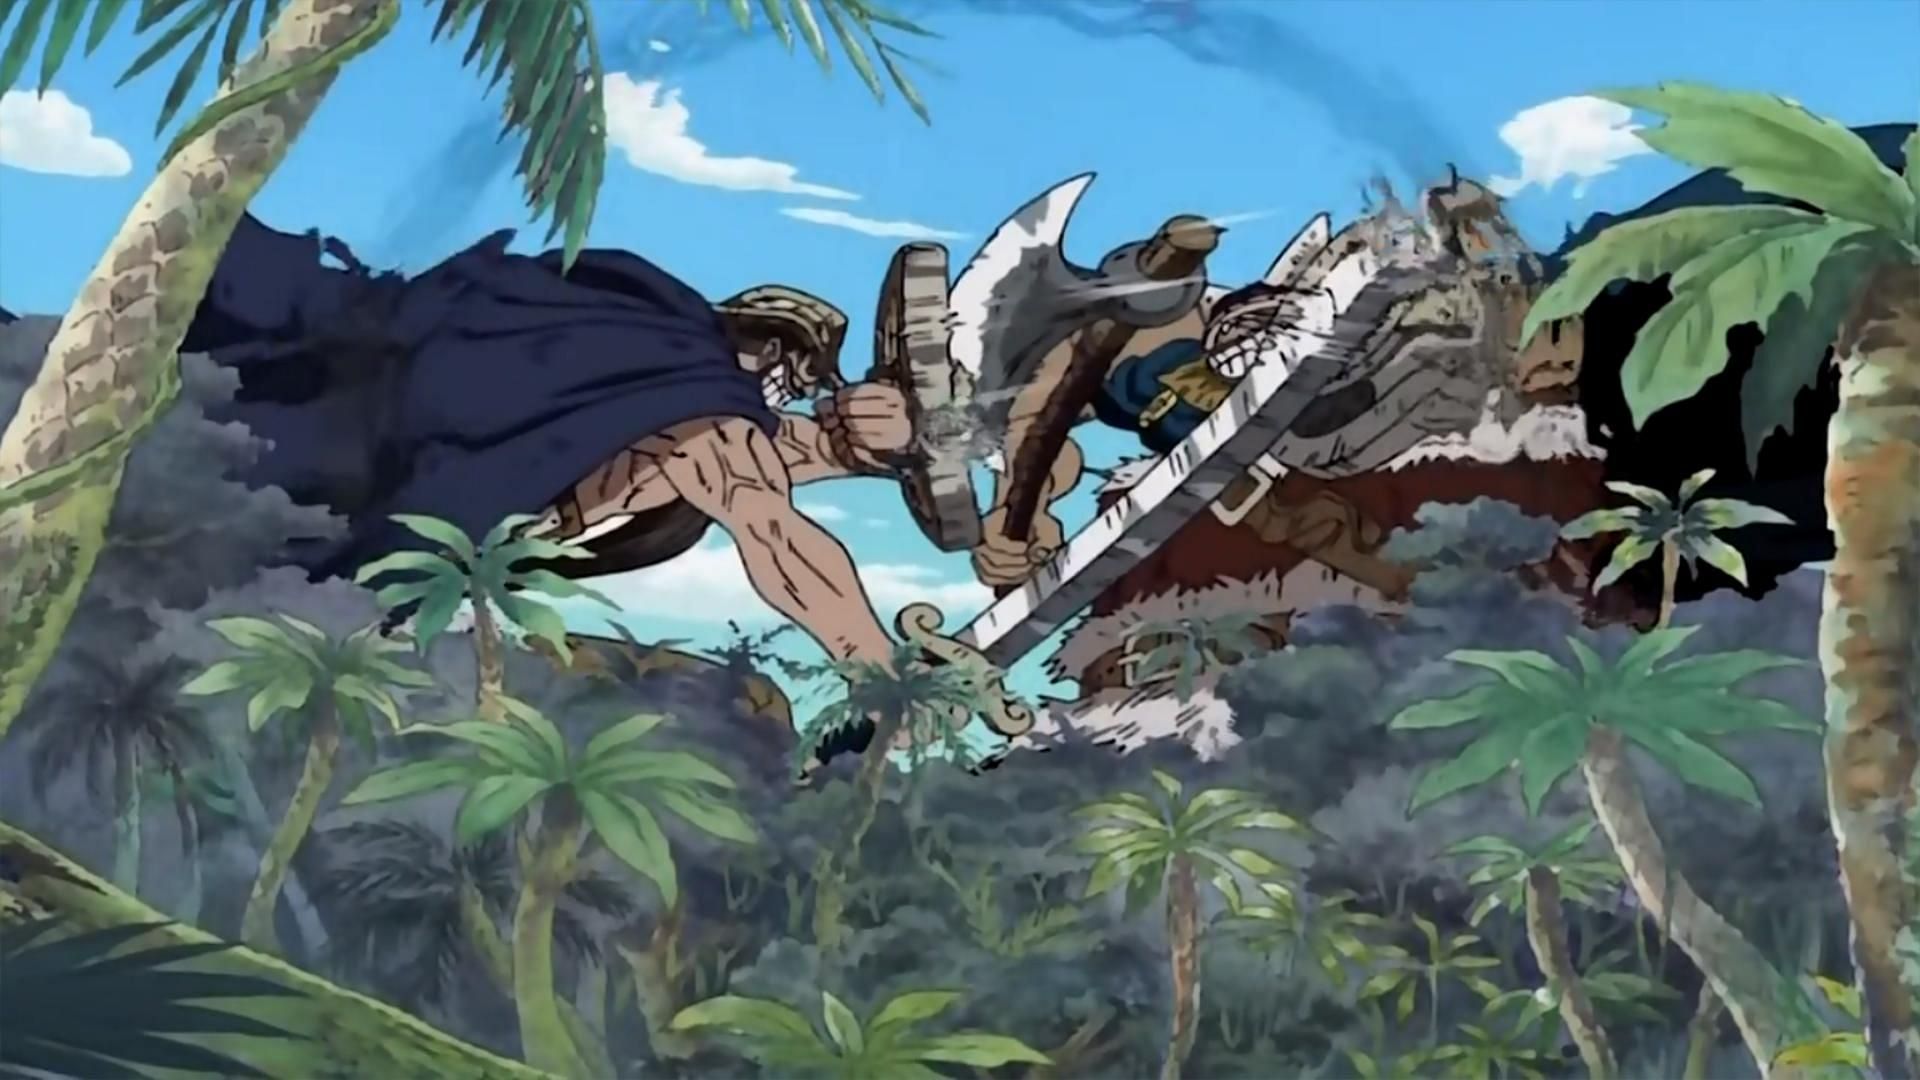 Dorry and Brogy as seen in One Piece (Image via Toei Animation, One Piece)